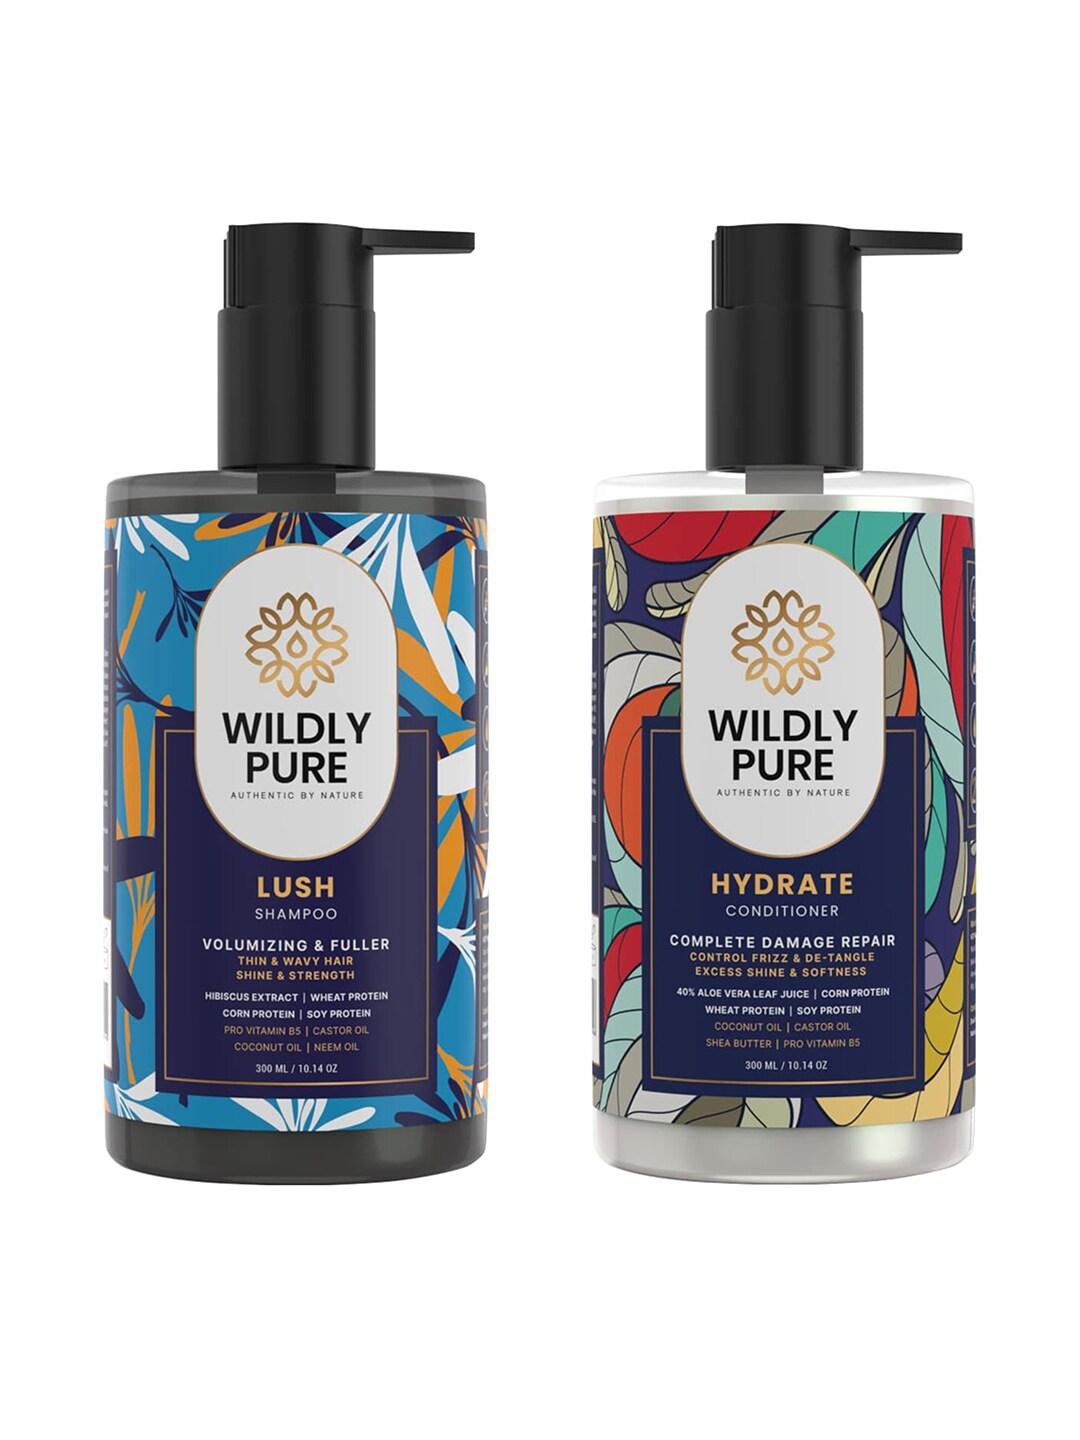 Wildly Pure Set of 2 Volume Boost Shampoo & Conditioner 300ml each